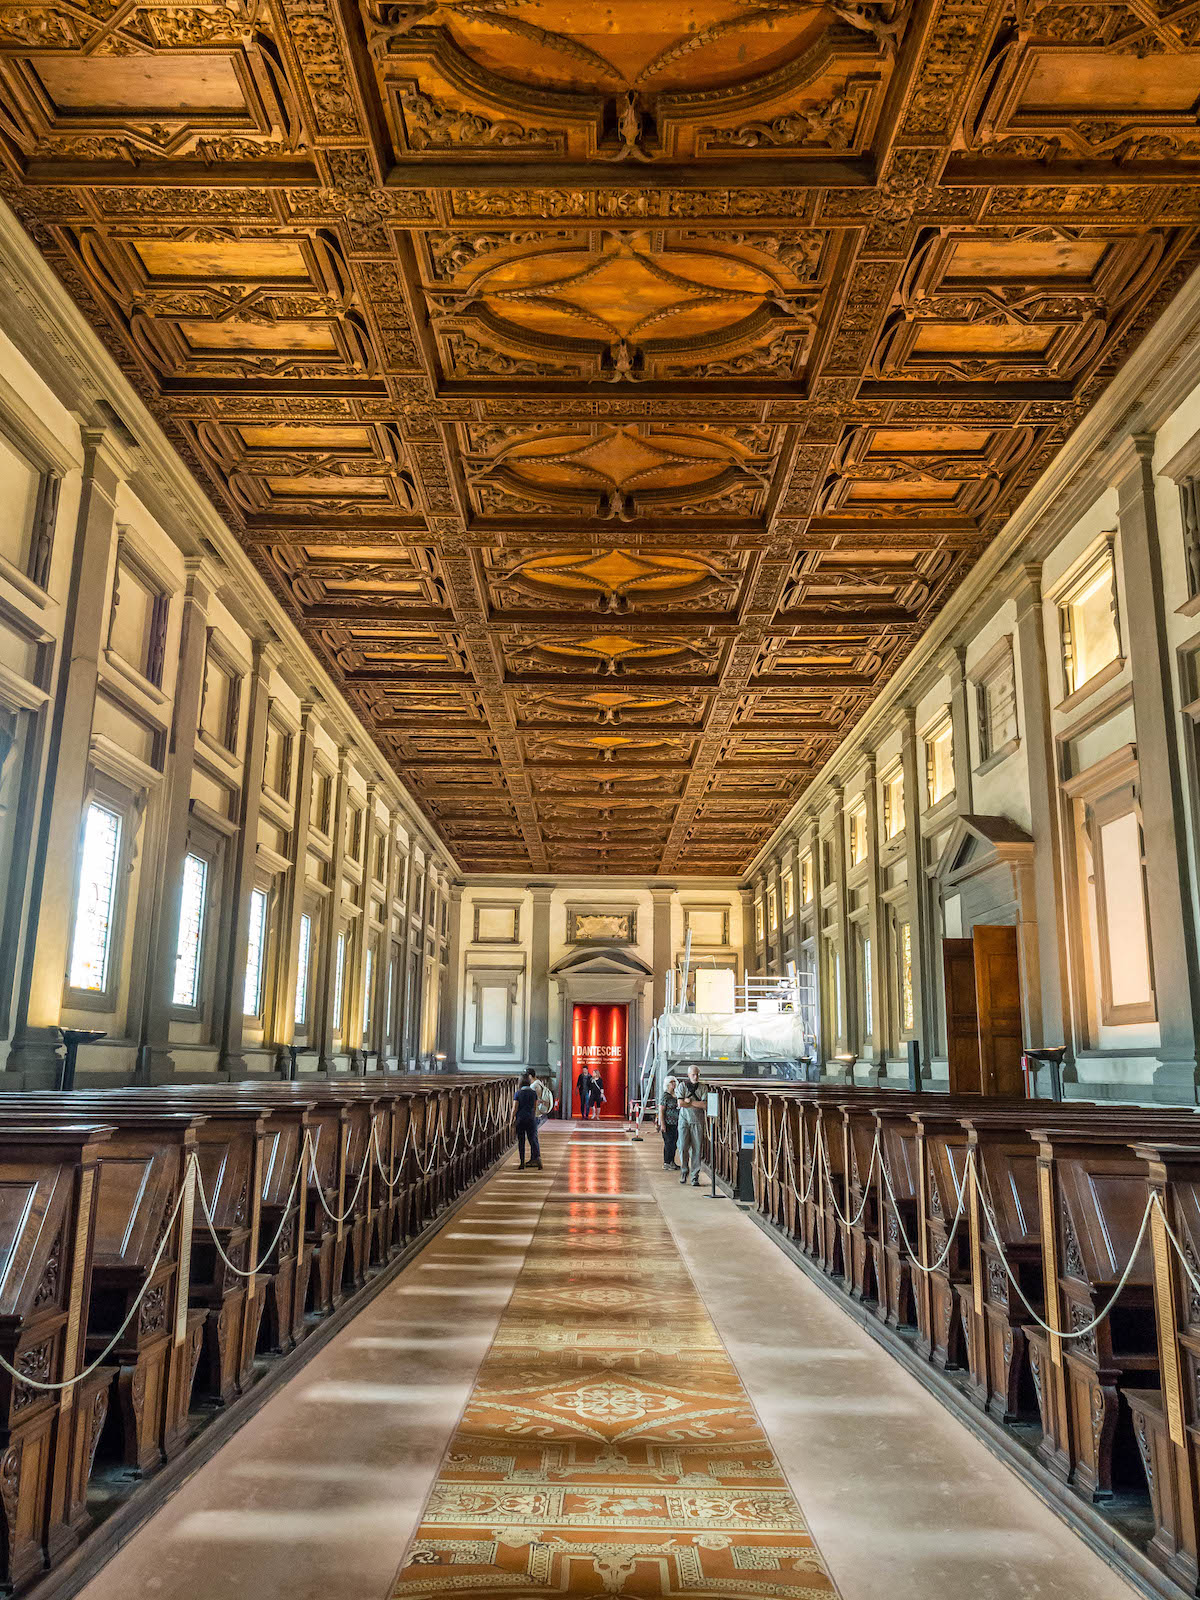 Long, high ceilinged room decorated in the Renaissance style and with a center aisle lined by rows of benches